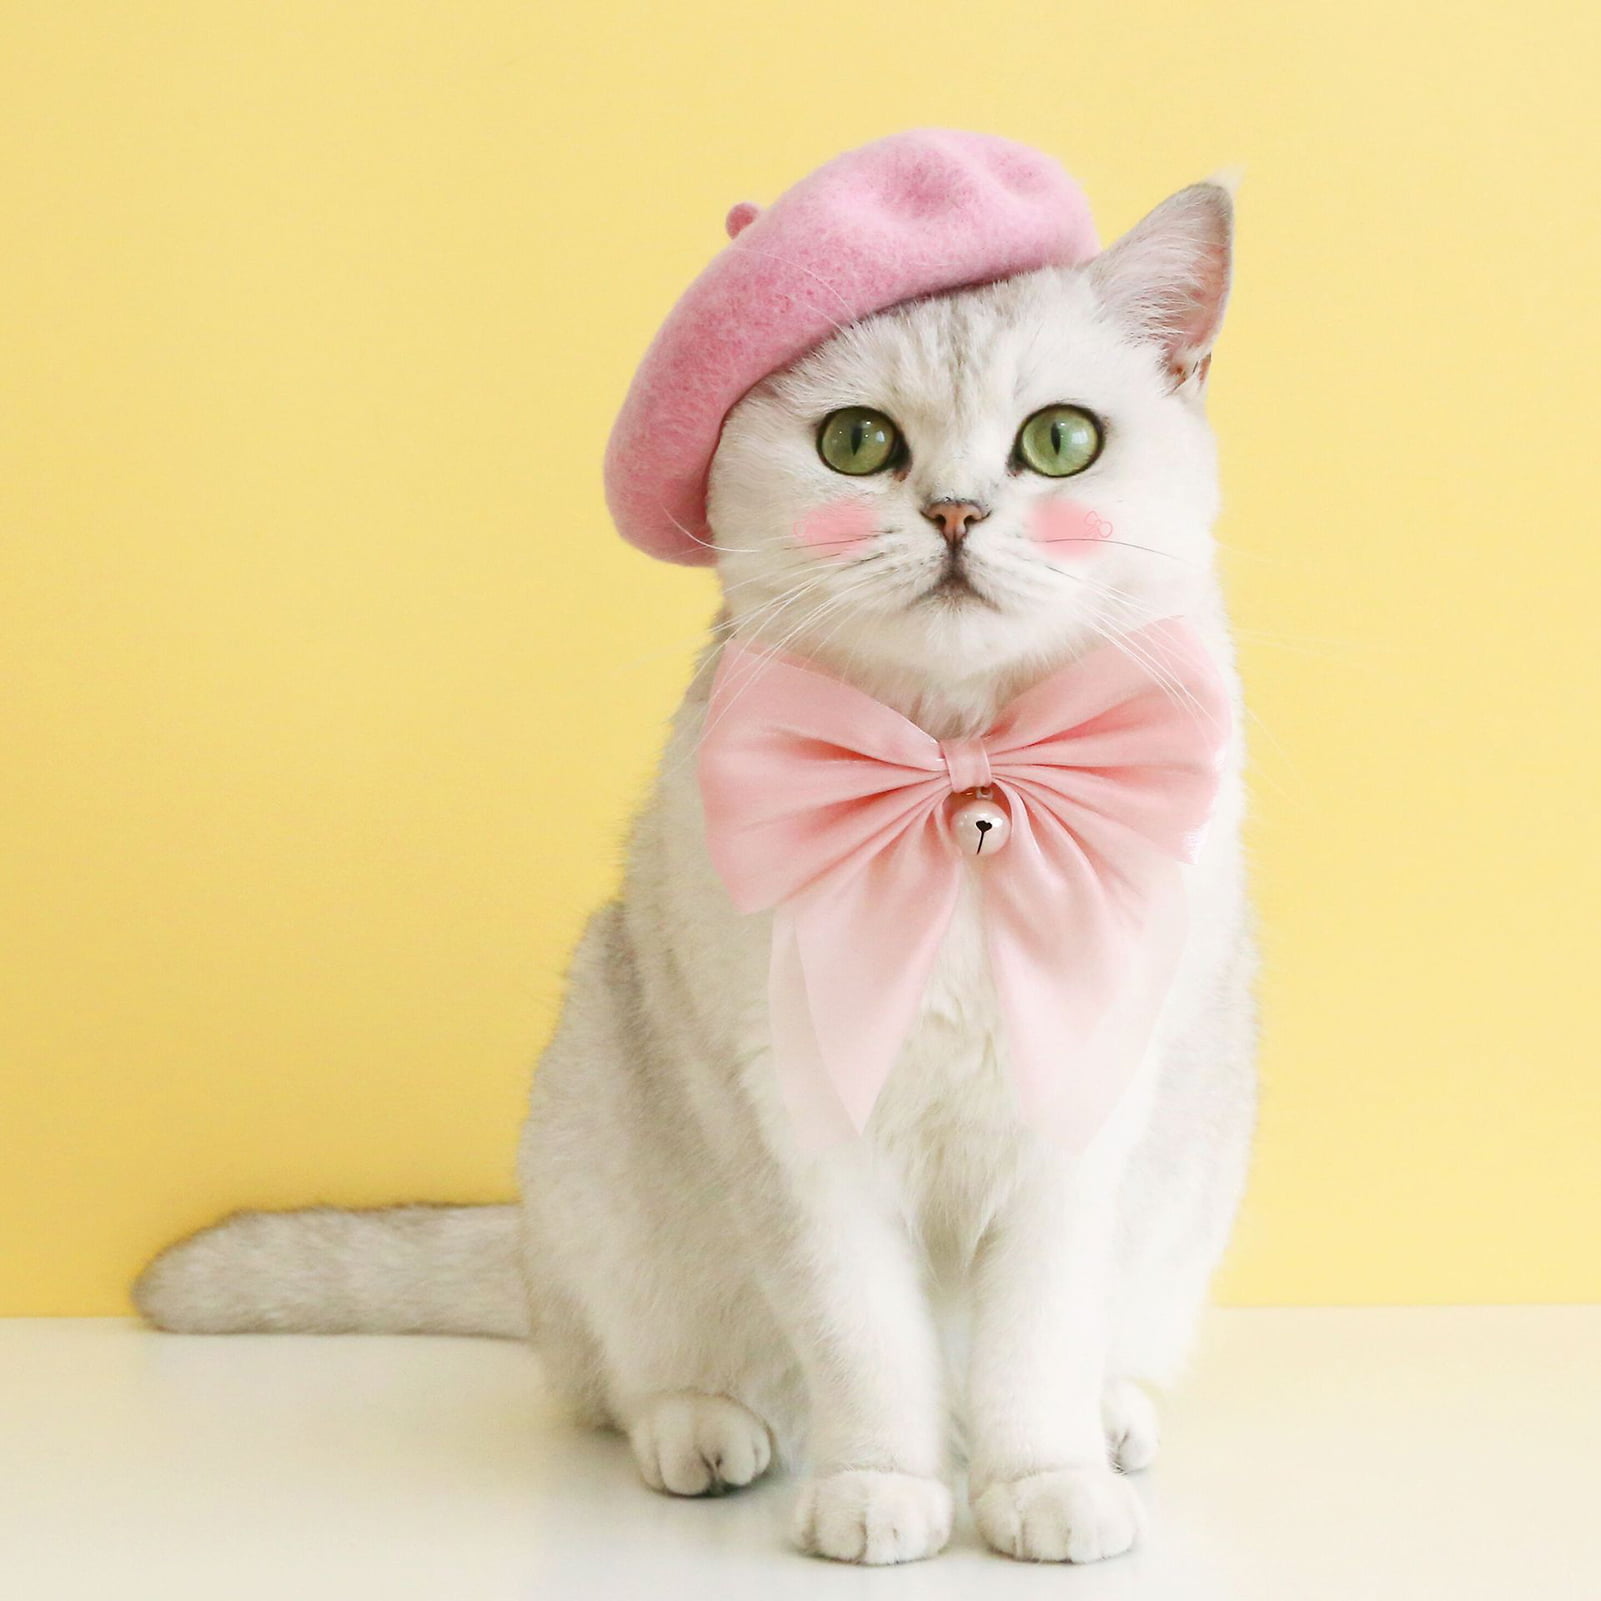 cute kitty cat with bow tie baby girl hat baseball cap 2-5 years caps -  Only Cat Shirts